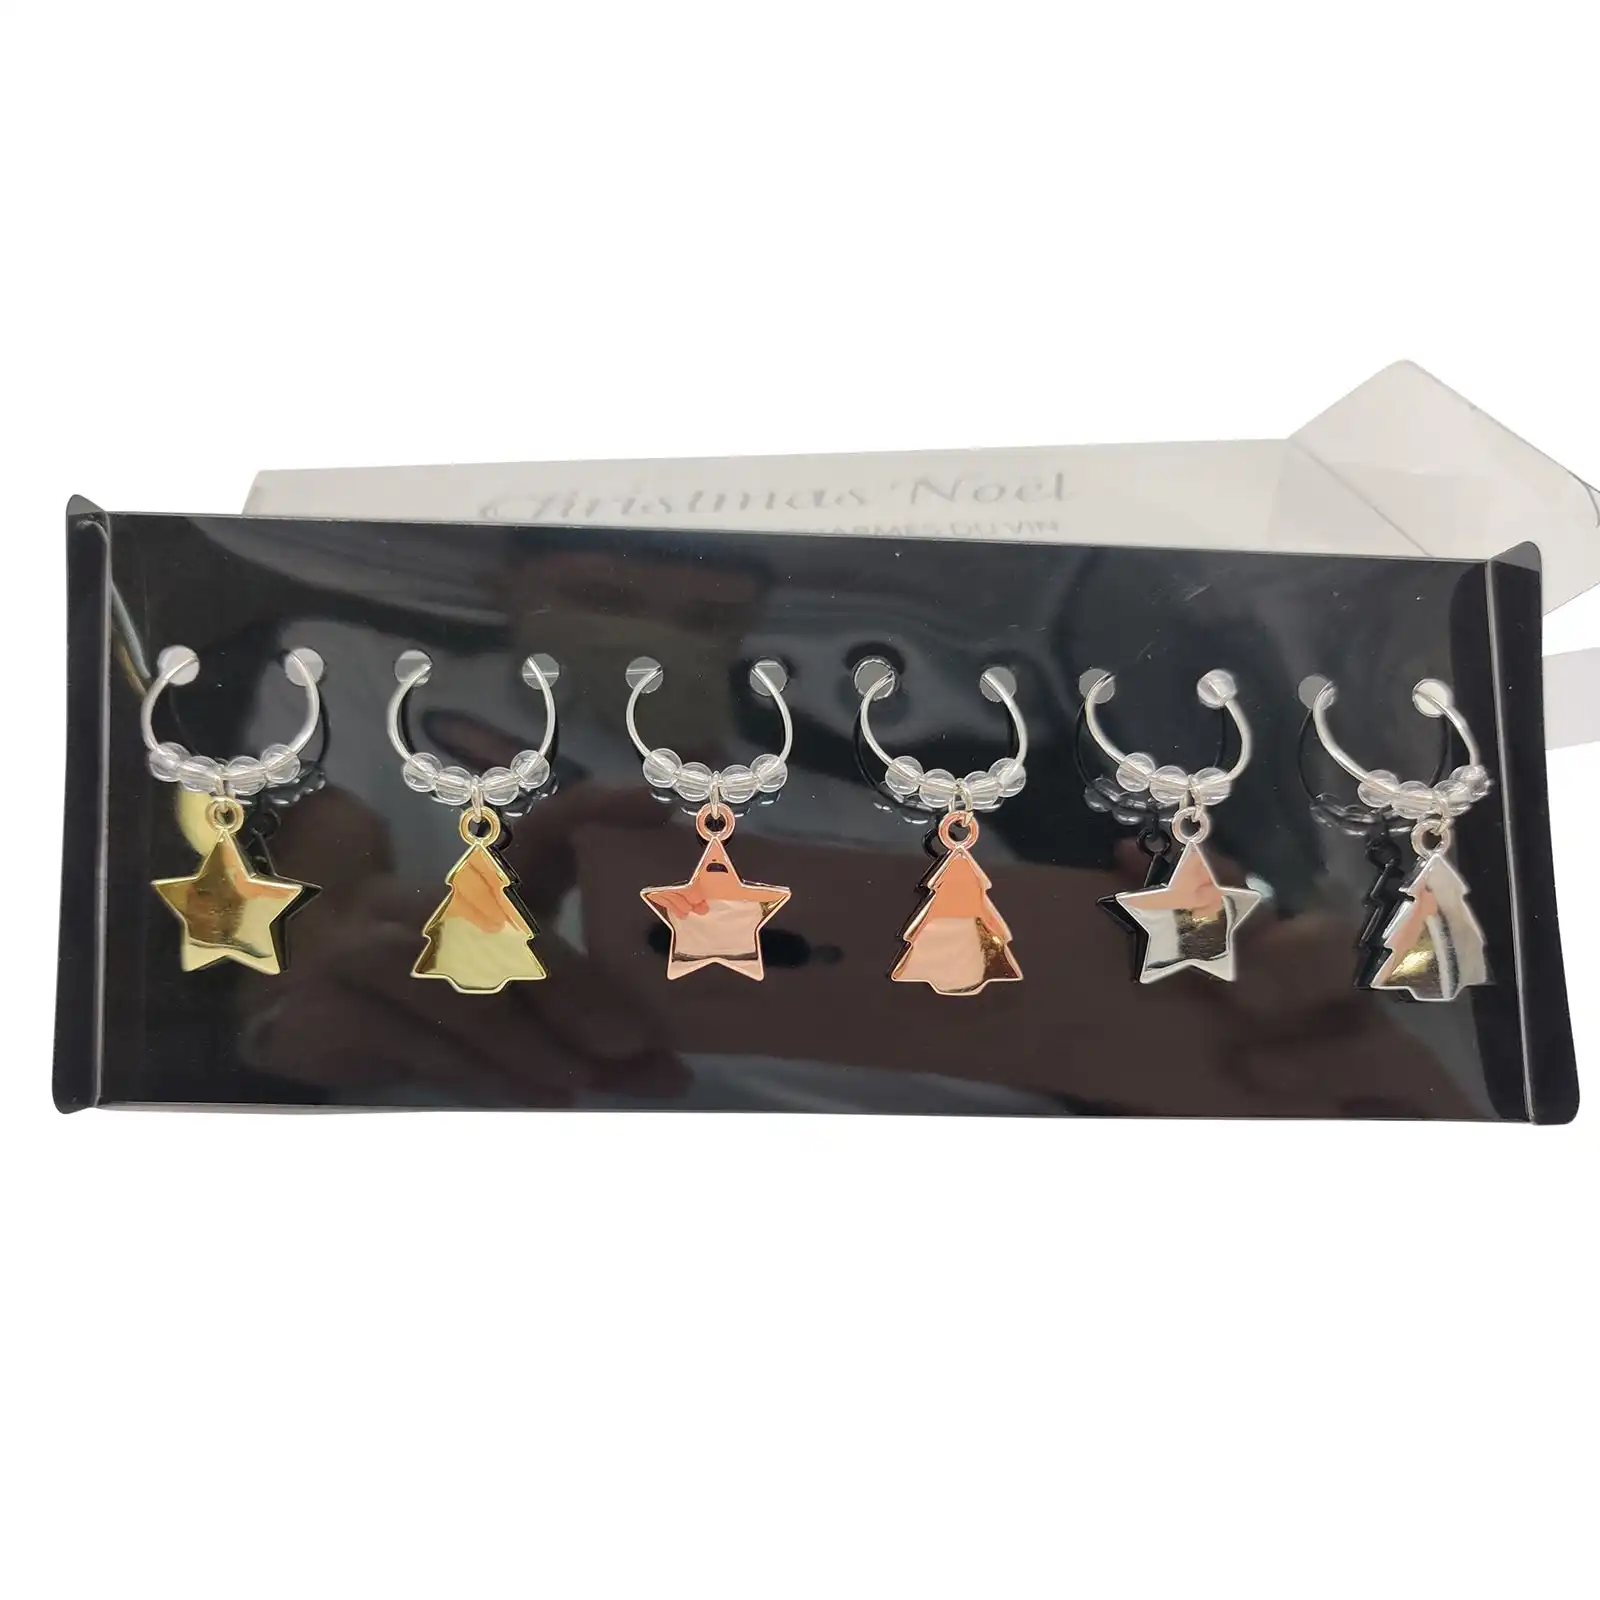 Bread and Butter (3) Star and (3) Tree Wine Glass Charms - 6 Pack